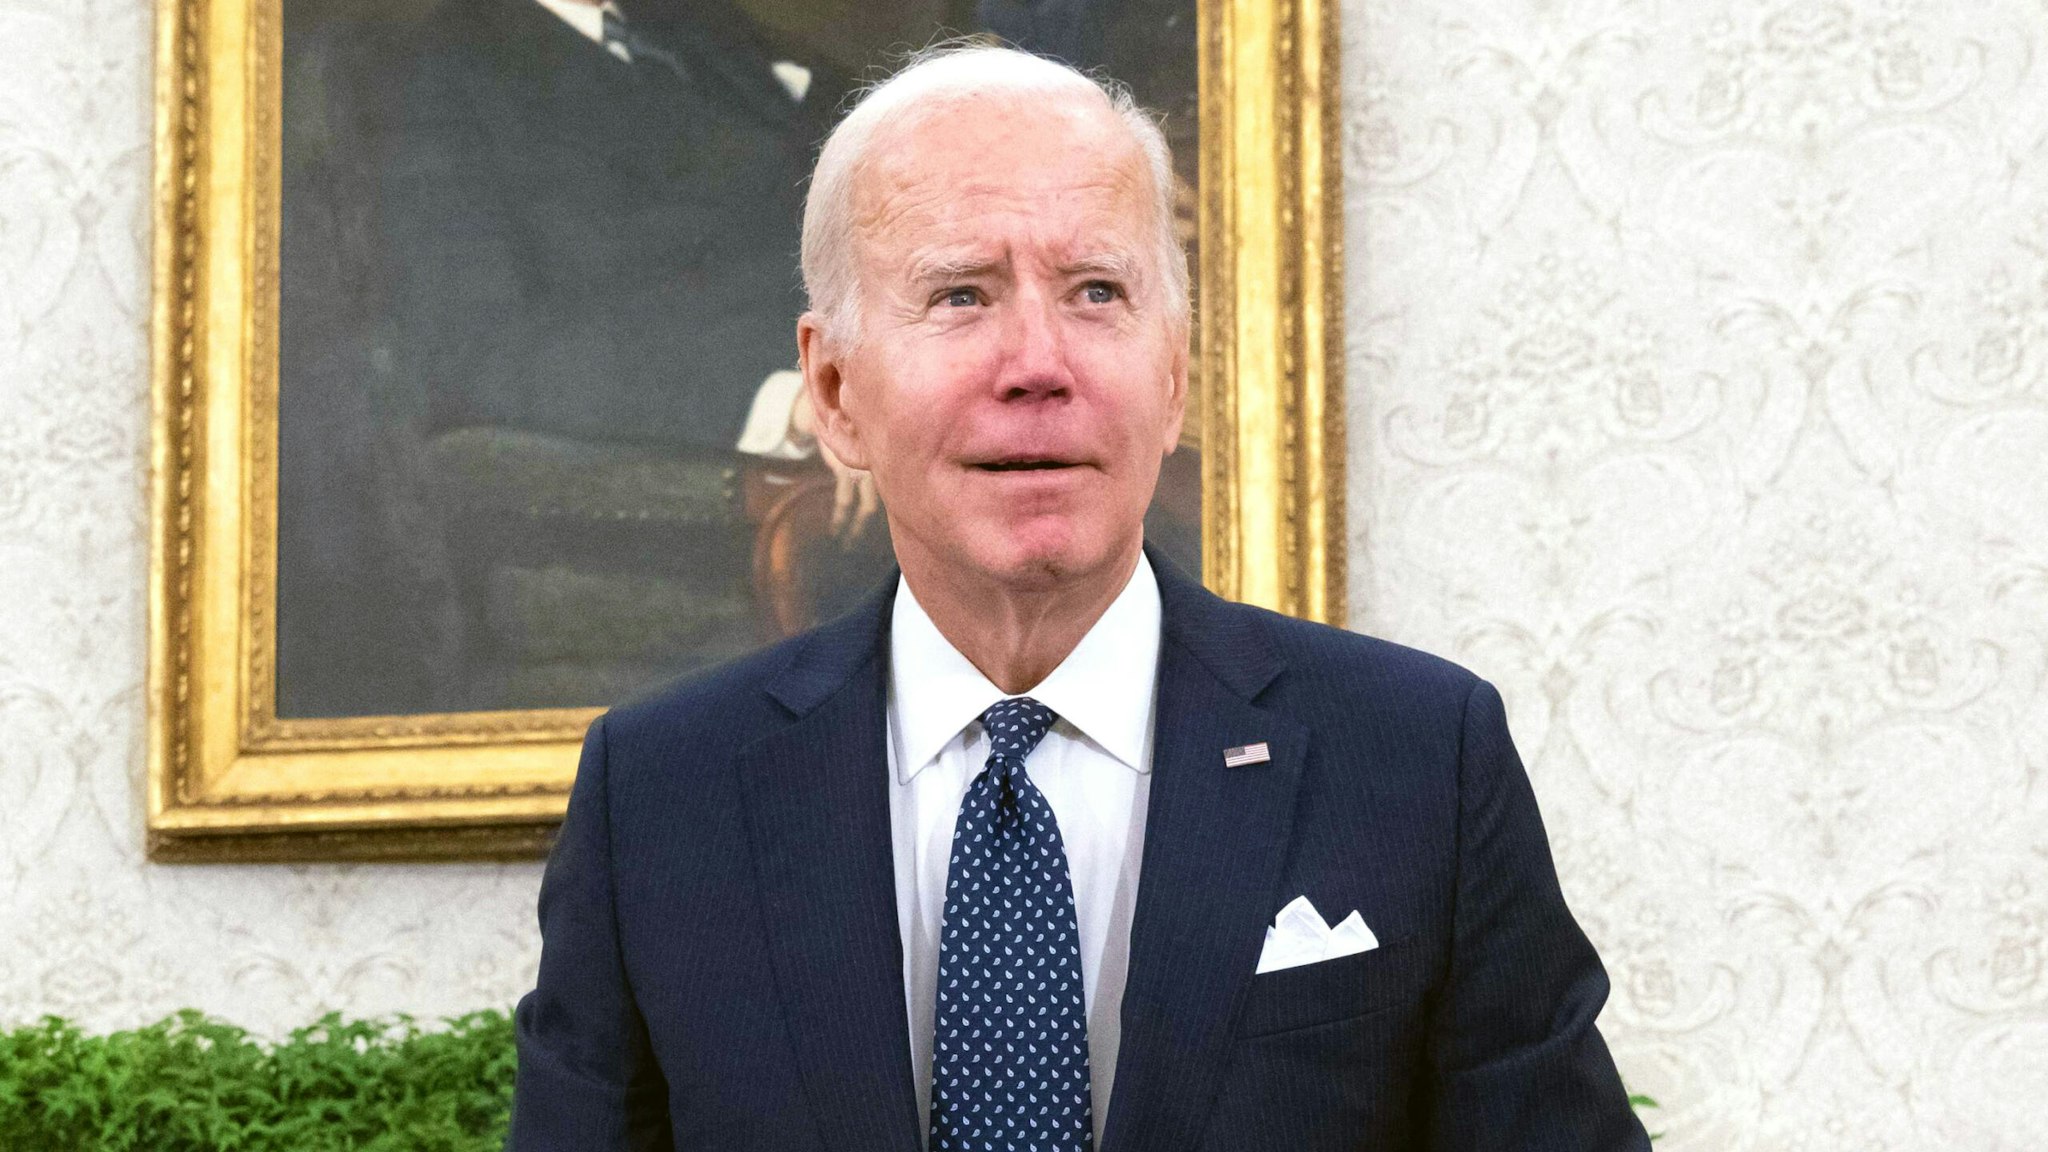 US President Joe Biden (R) stands during a meeting with Israeli President Isaac Herzog in the Oval Office of the White House in Washington, DC, on October 26, 2022.